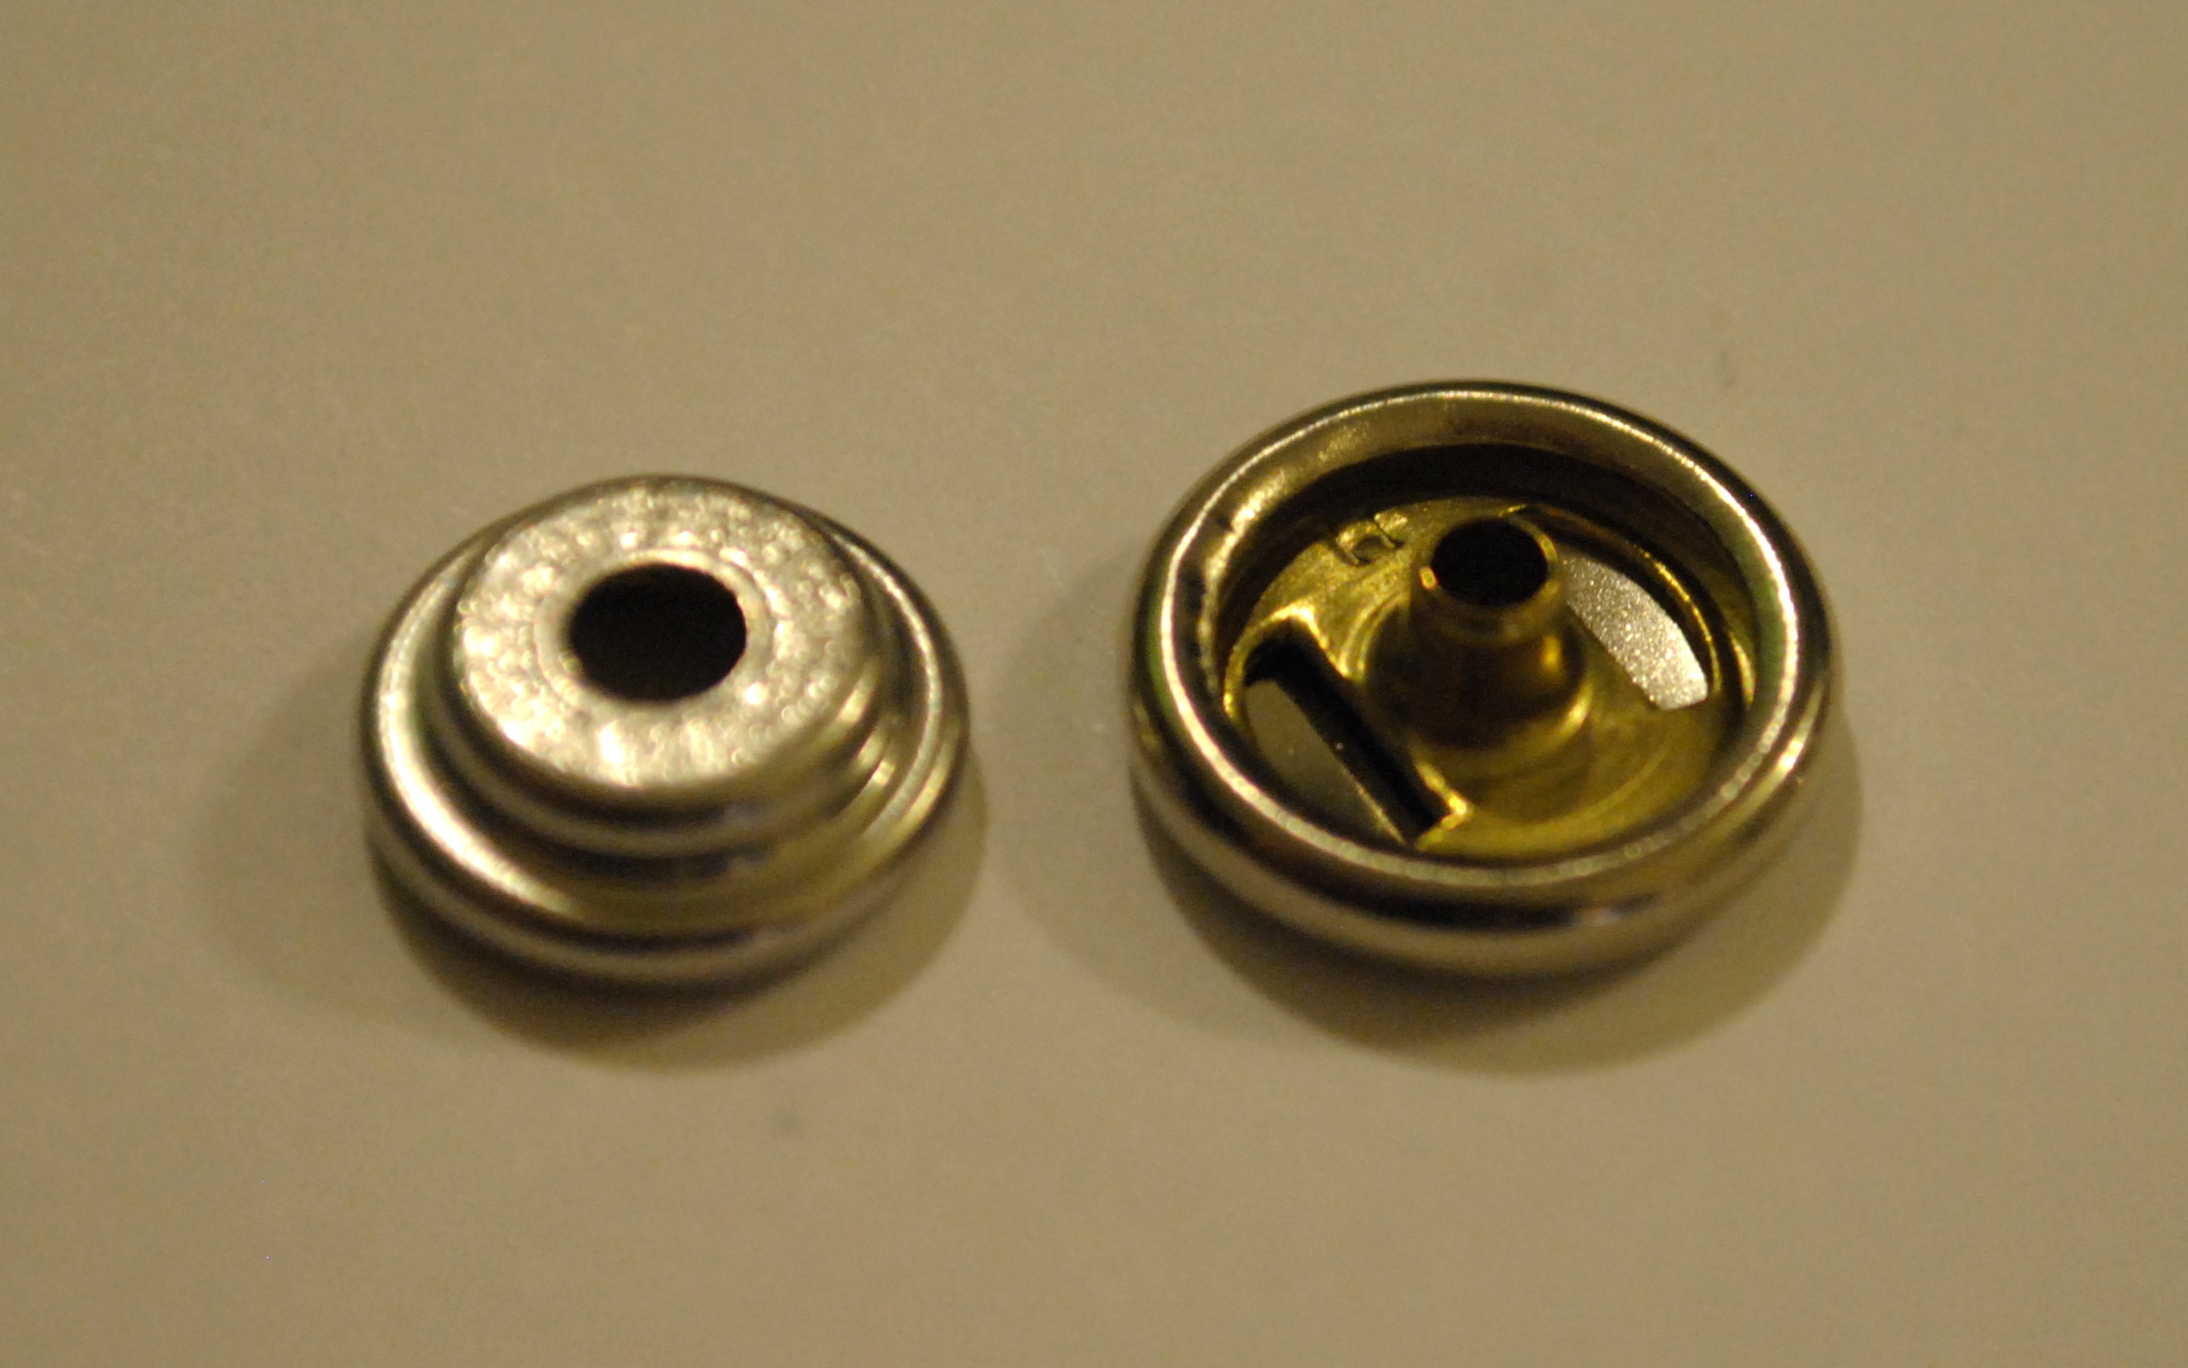 A brief History of the Snap Fastener